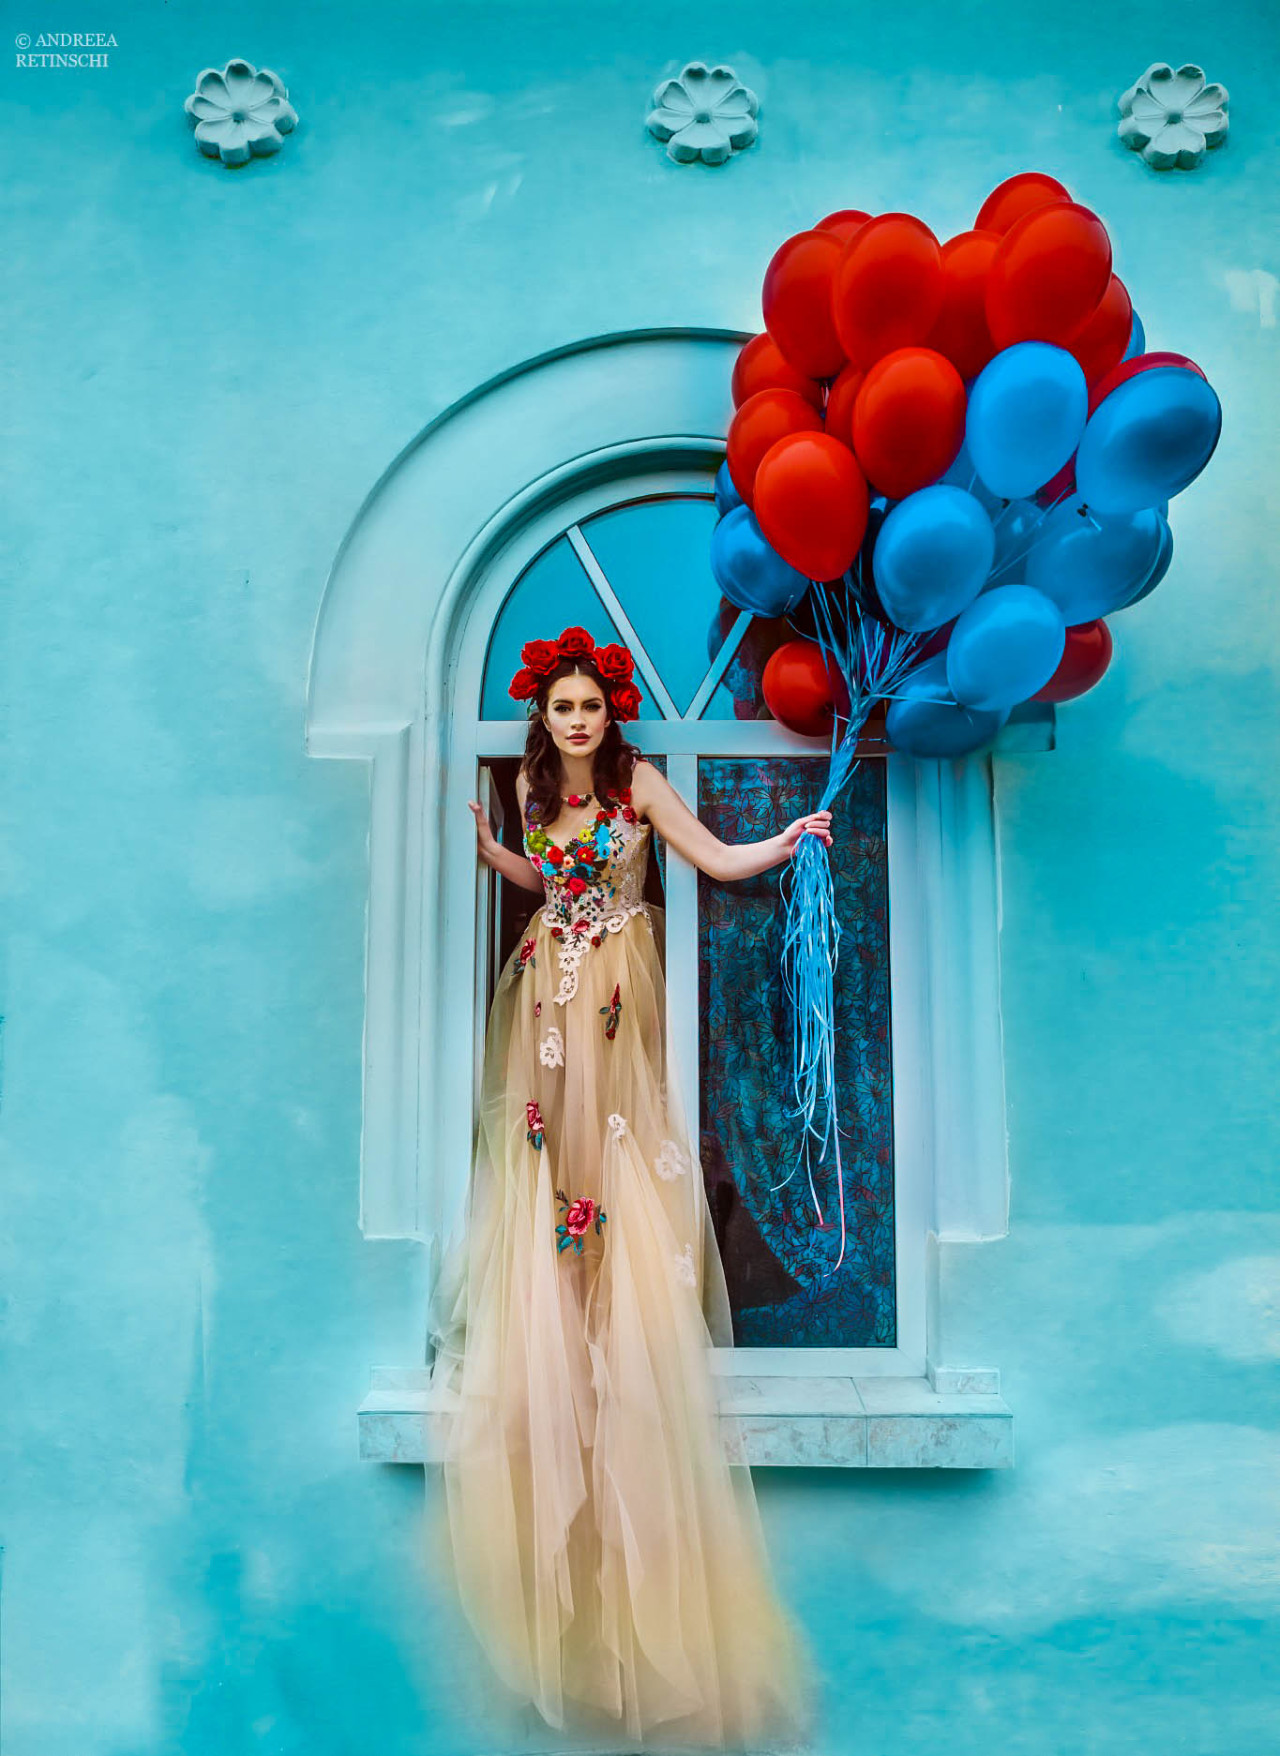 Andreea Retinschi Photography   #fashion#photography#portrait#makeup#jewelry#jewellery#portrait photography#aesthetic#make-up#fashionphotography#fashion photography#beauty#models#model#spring#spring vibes#balloons#dress#roses#flowers